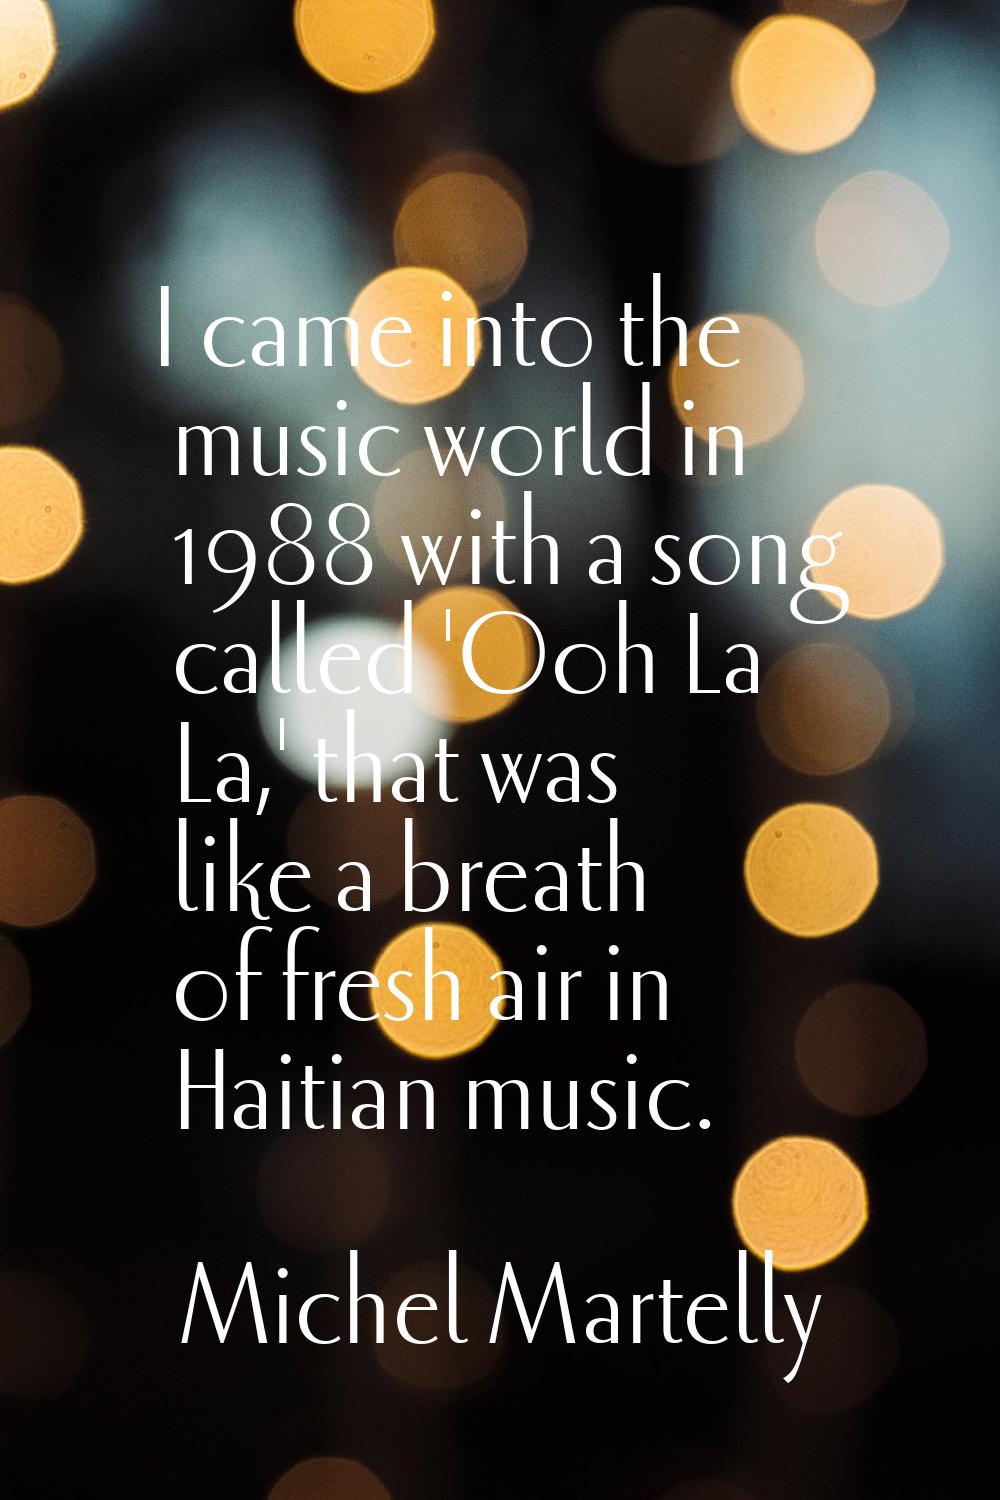 I came into the music world in 1988 with a song called 'Ooh La La,' that was like a breath of fresh